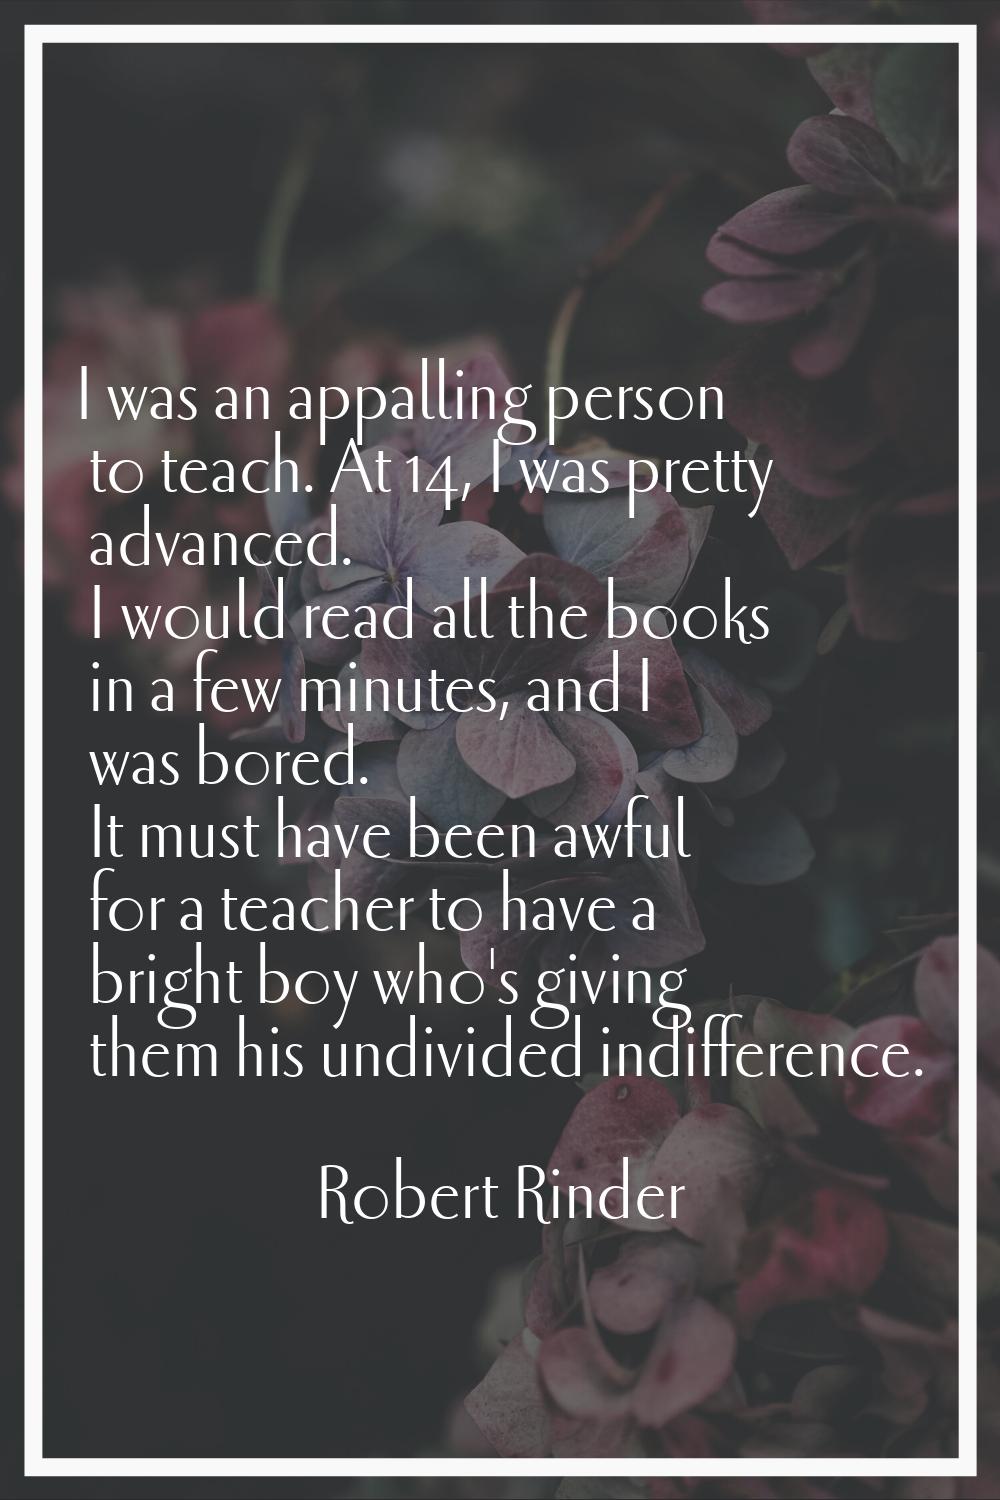 I was an appalling person to teach. At 14, I was pretty advanced. I would read all the books in a f